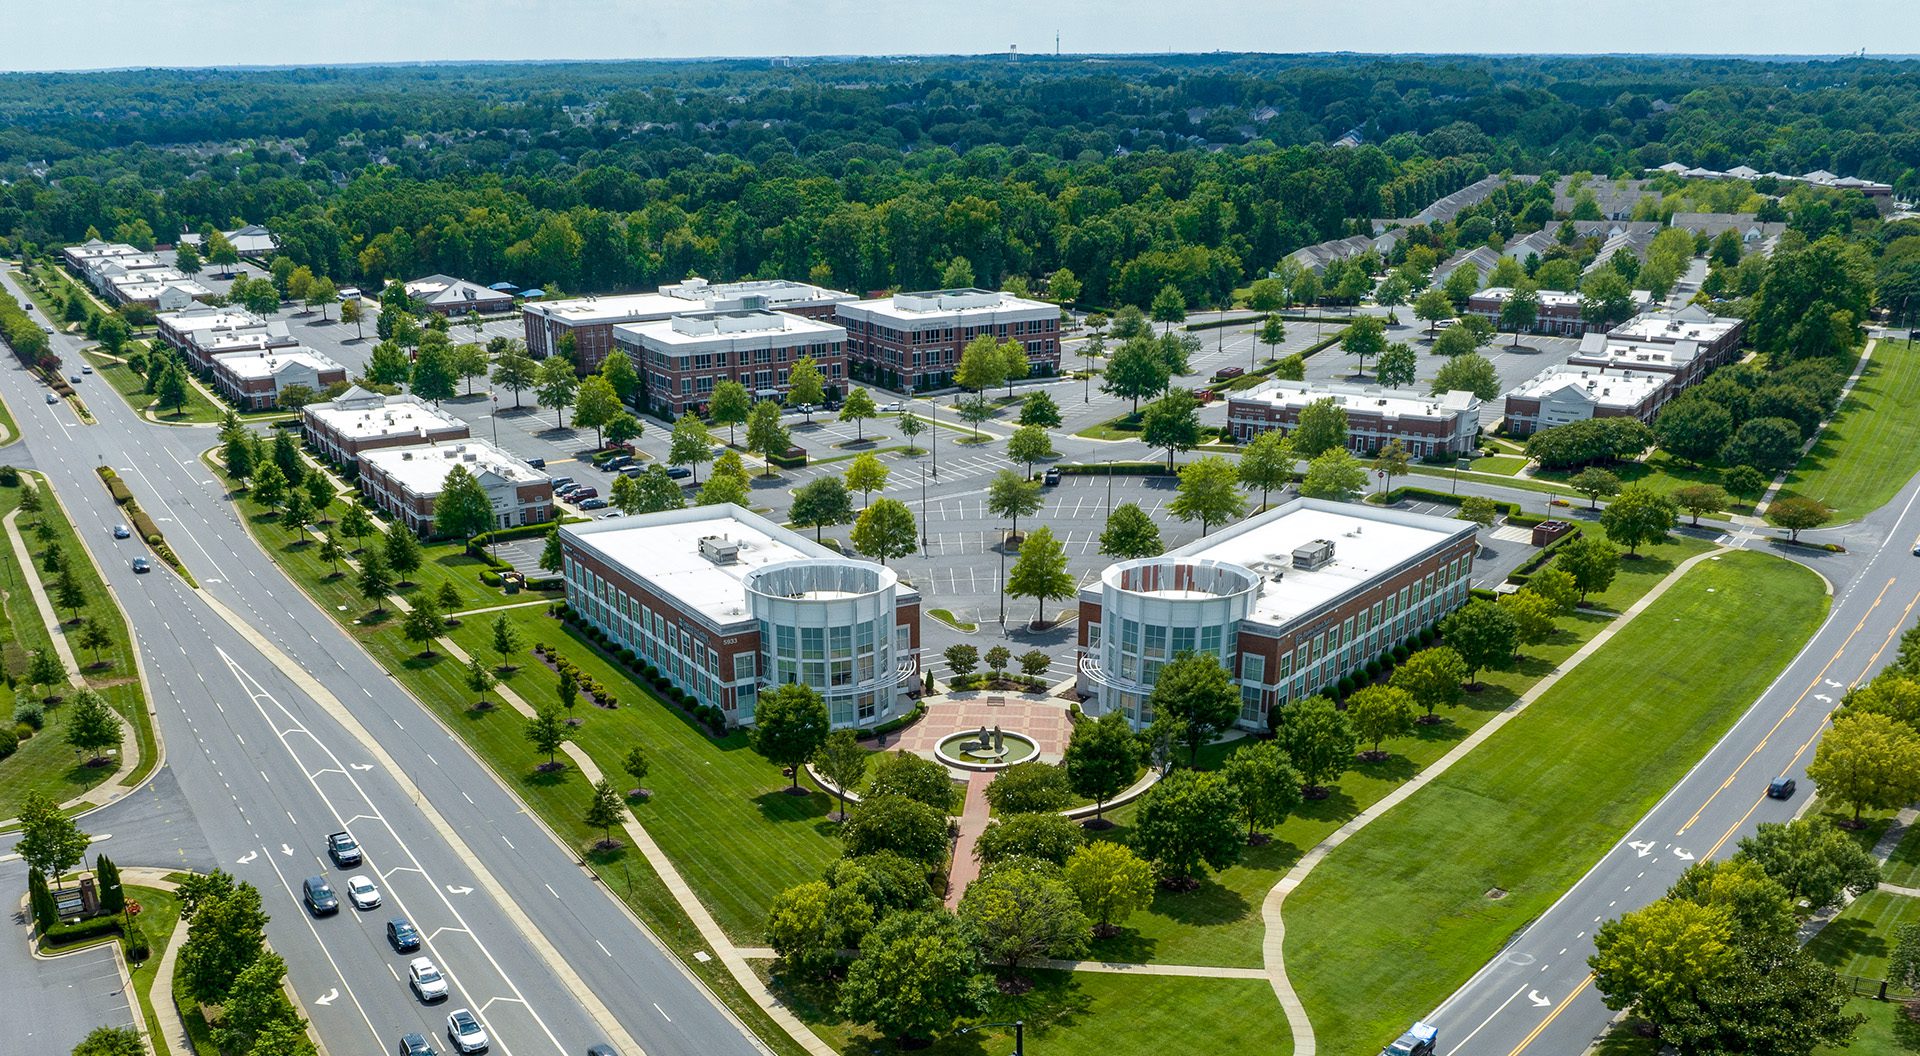 Aerial of Blakeney Professional Center in Charlotte, NC. A dozen or so brick medical office buildings with lots of trees and grass surrounding class A office